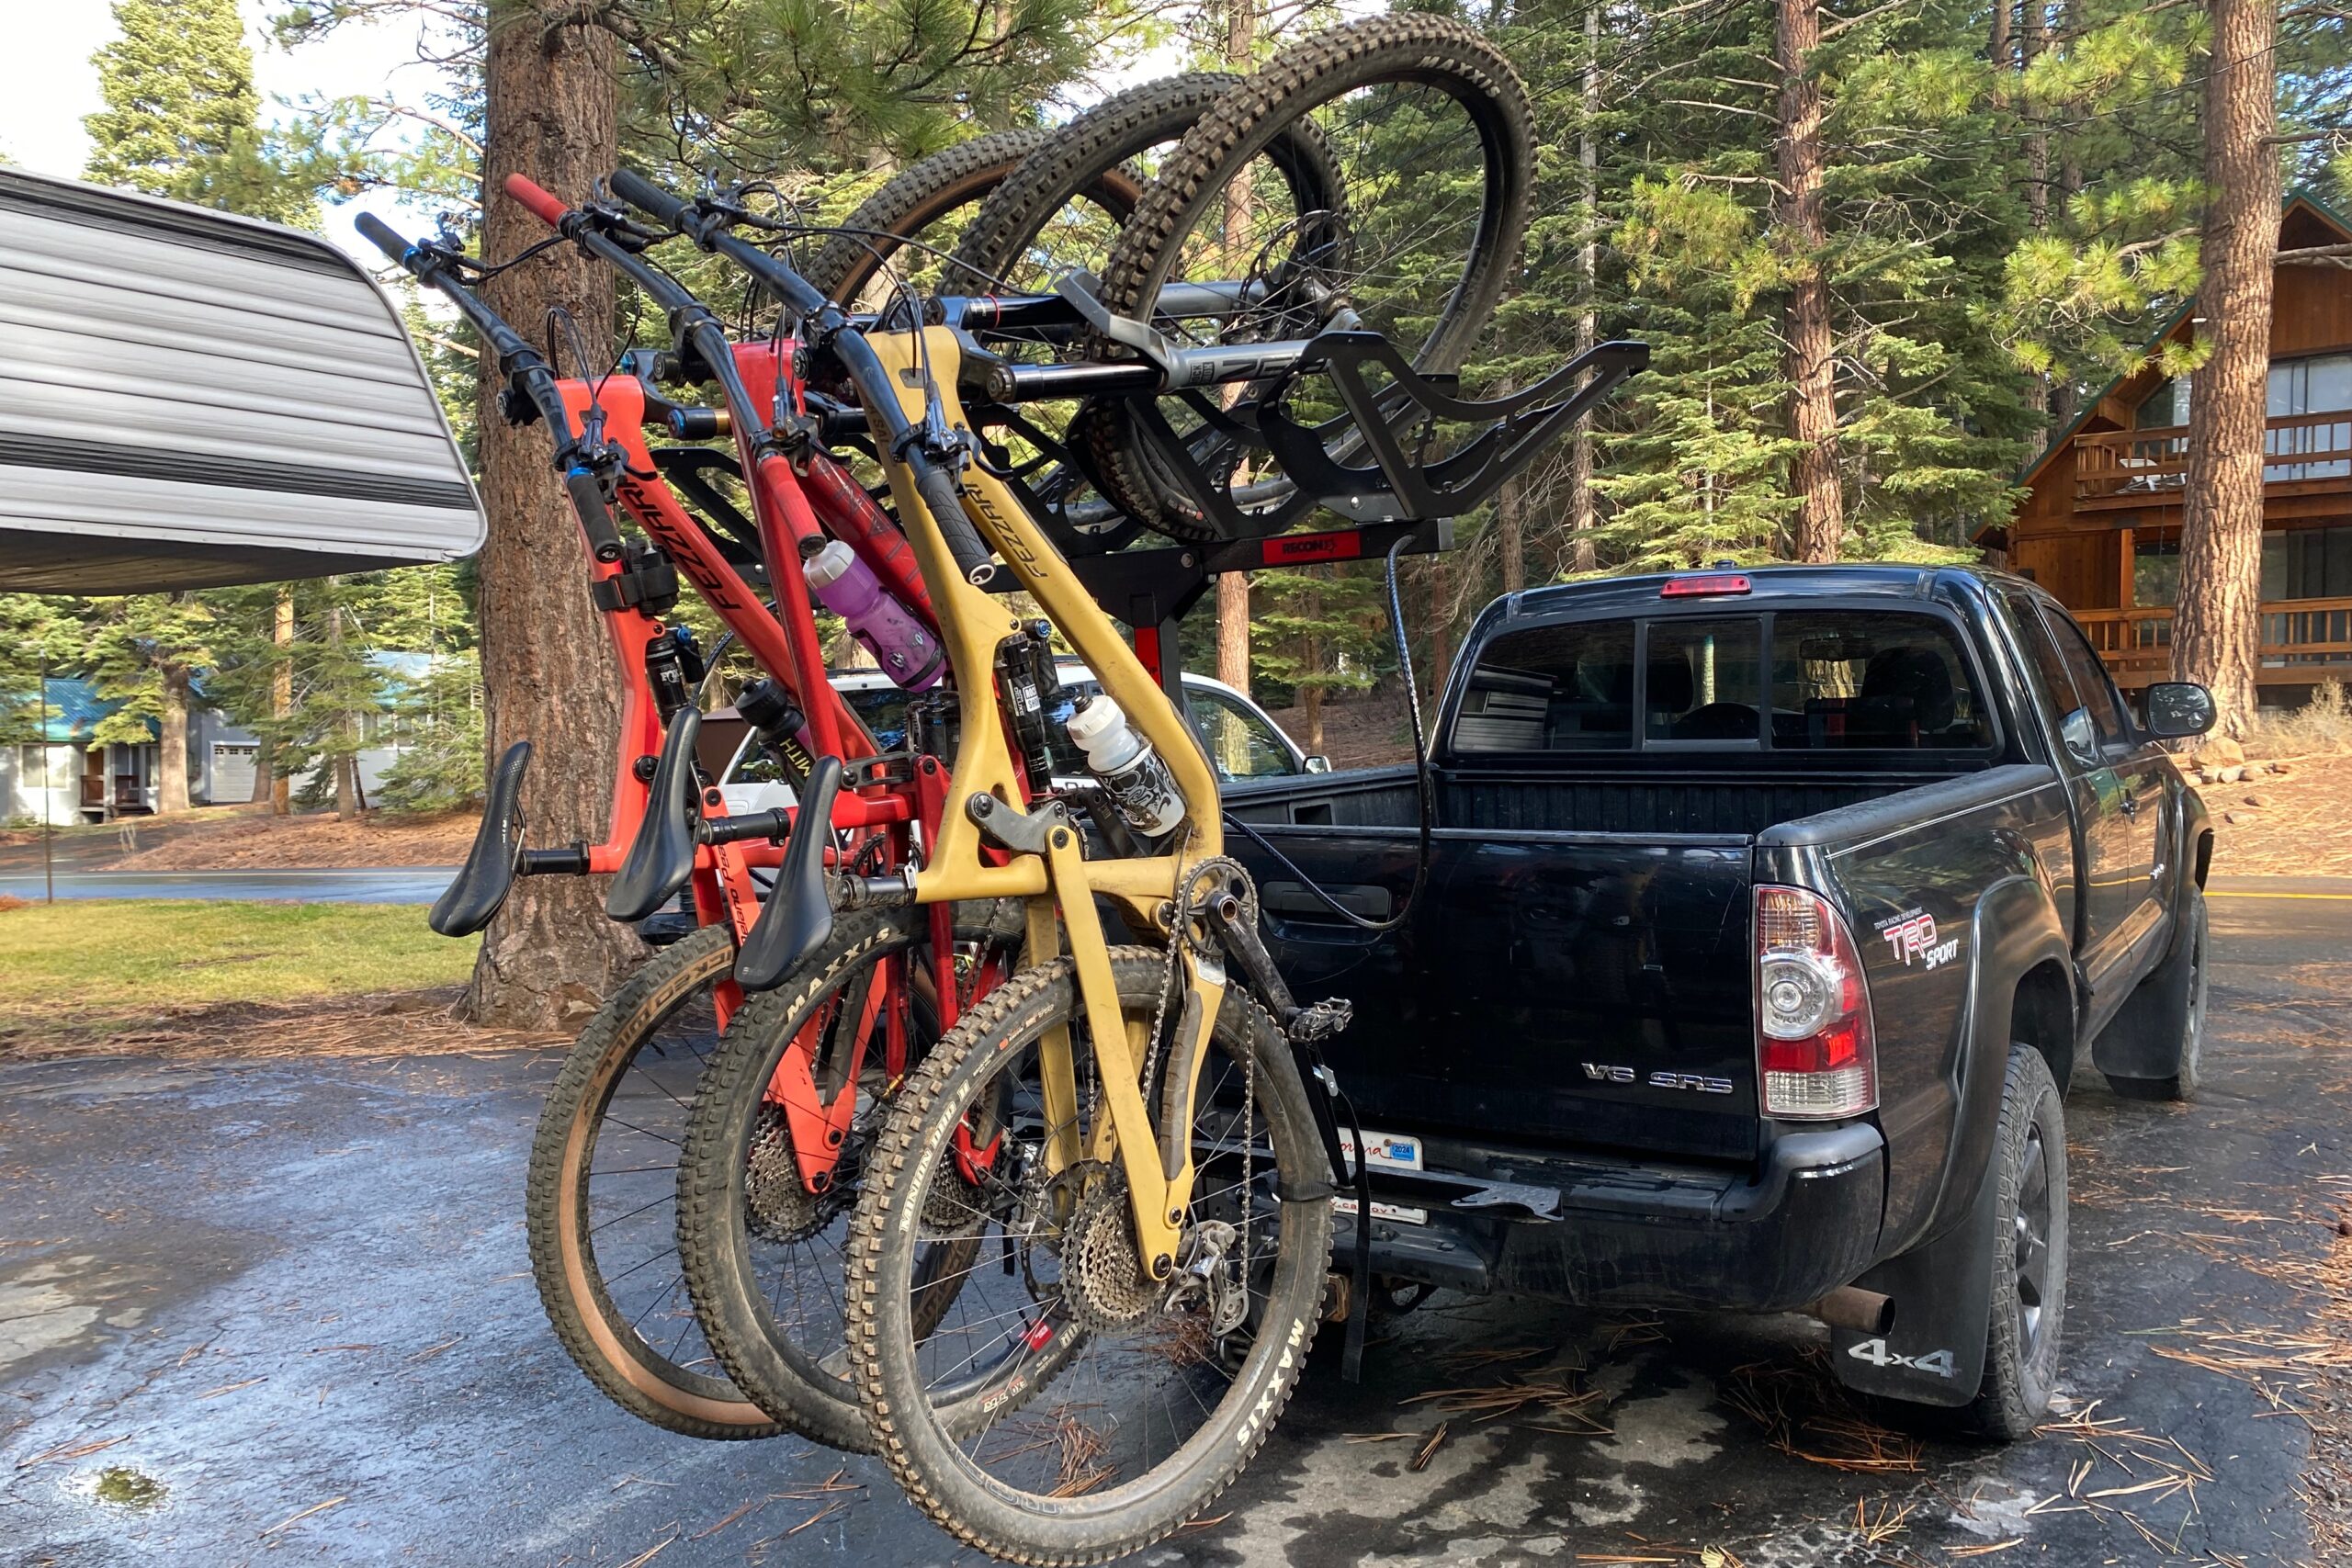 The 1Up Recon 5 loaded with 3 mountain bikes